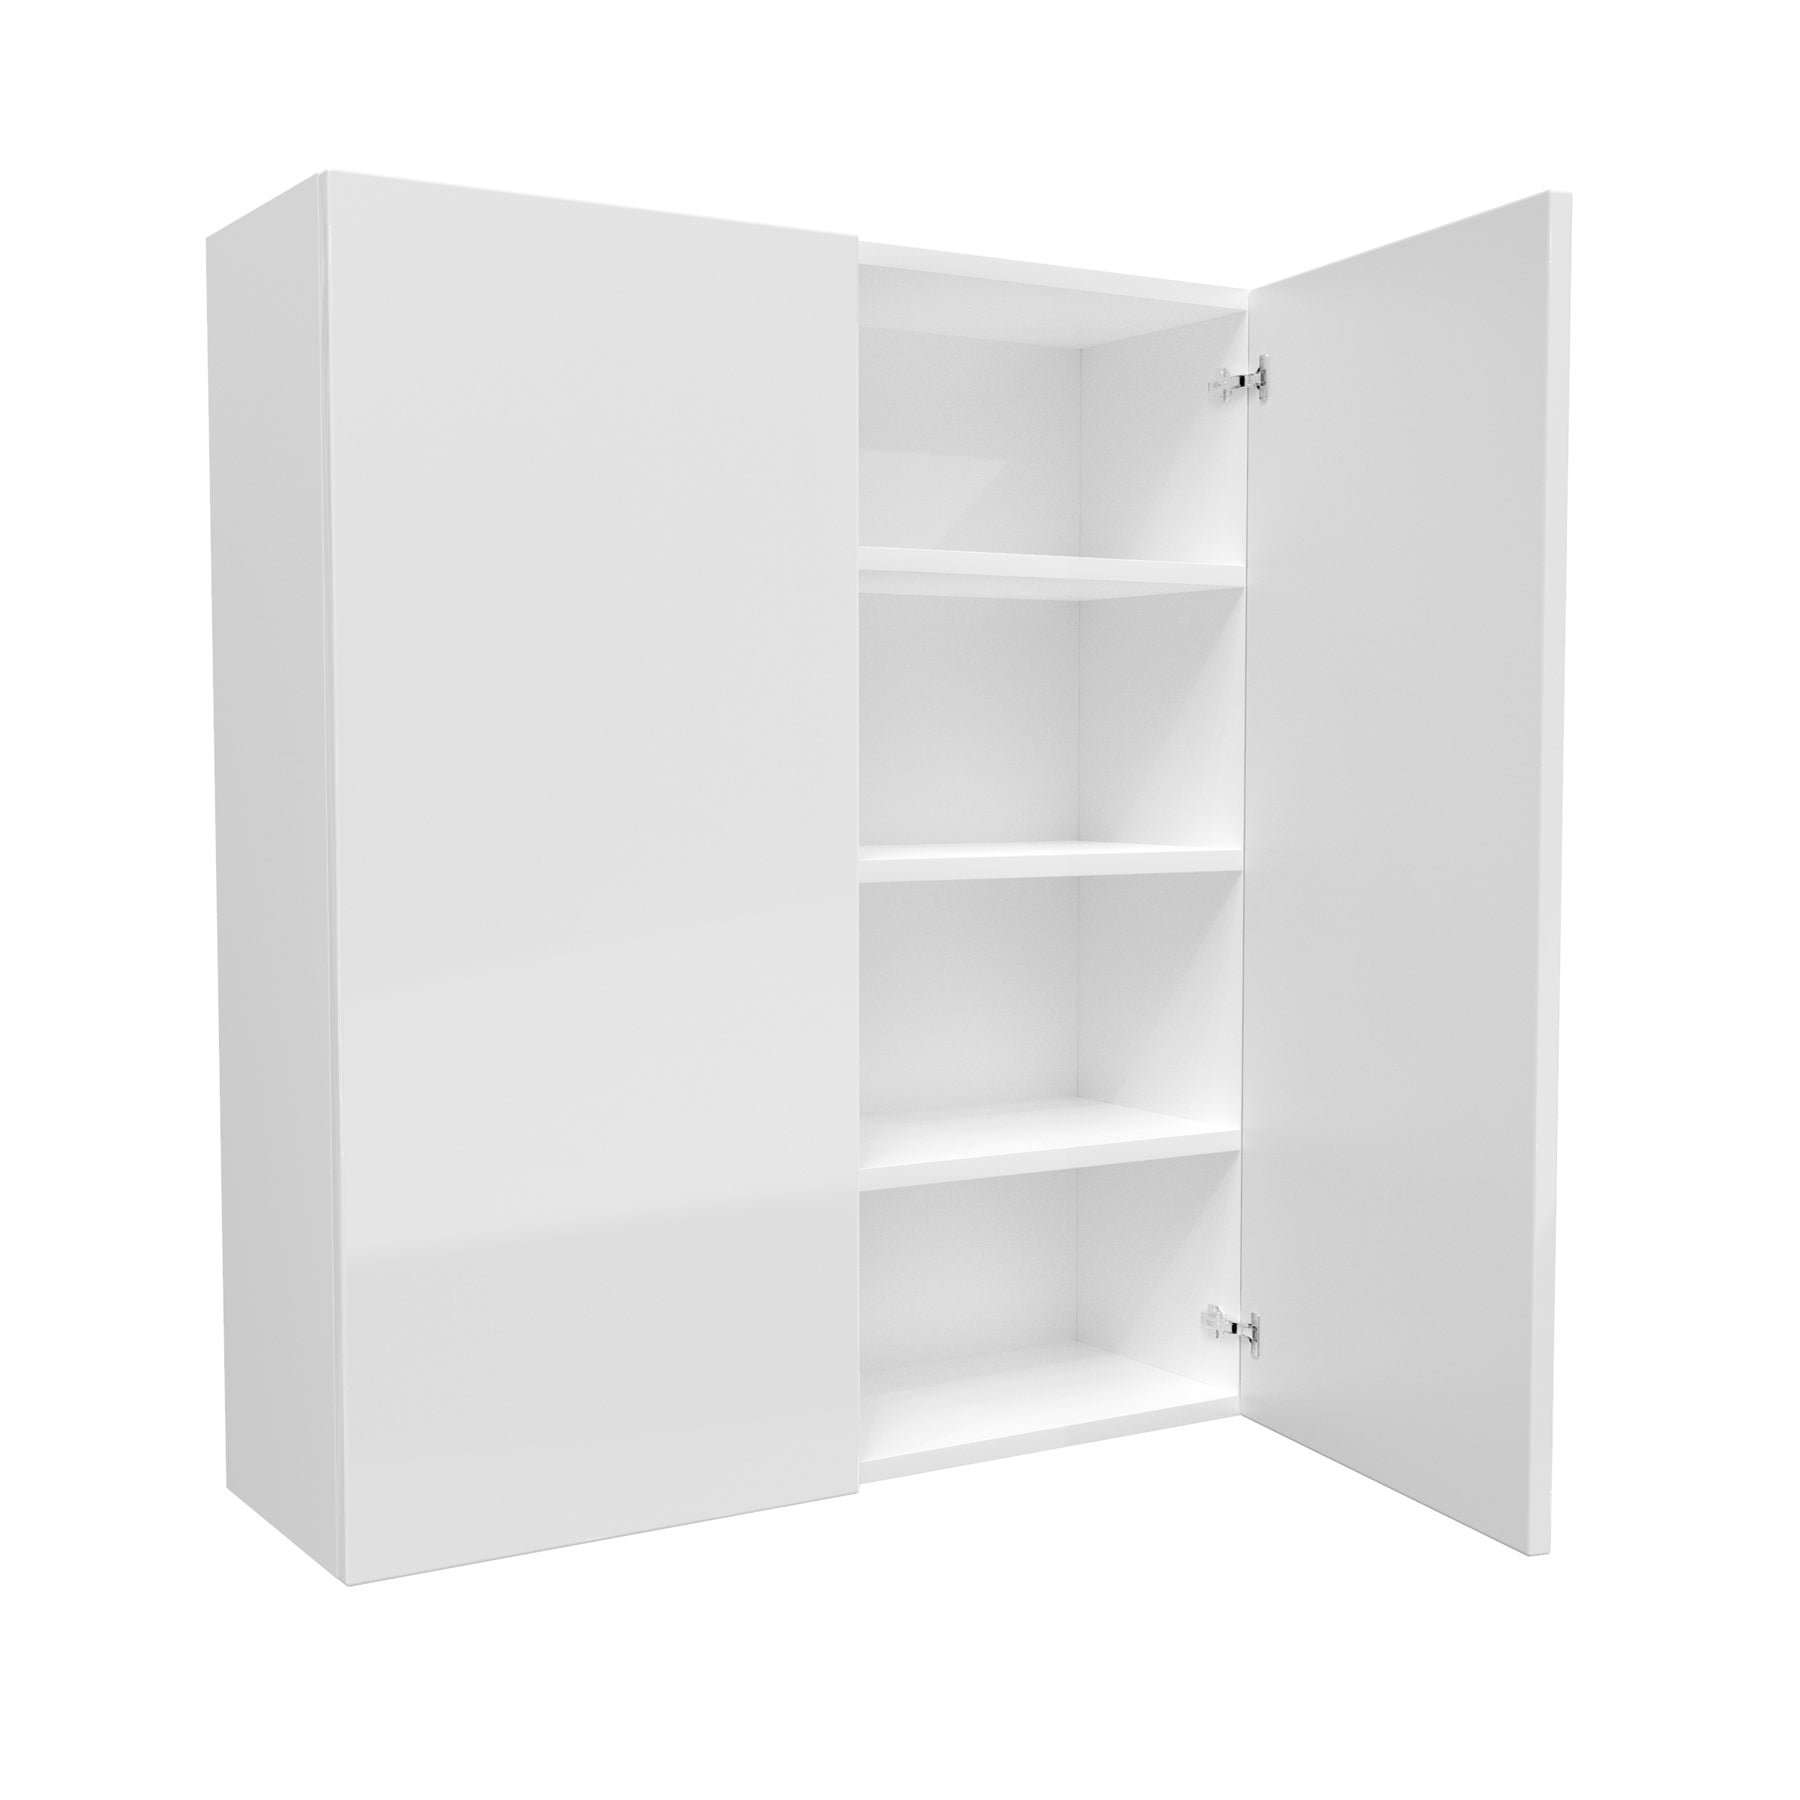 Double Door Wall Cabinet | Milano White | 36W x 42H x 12D